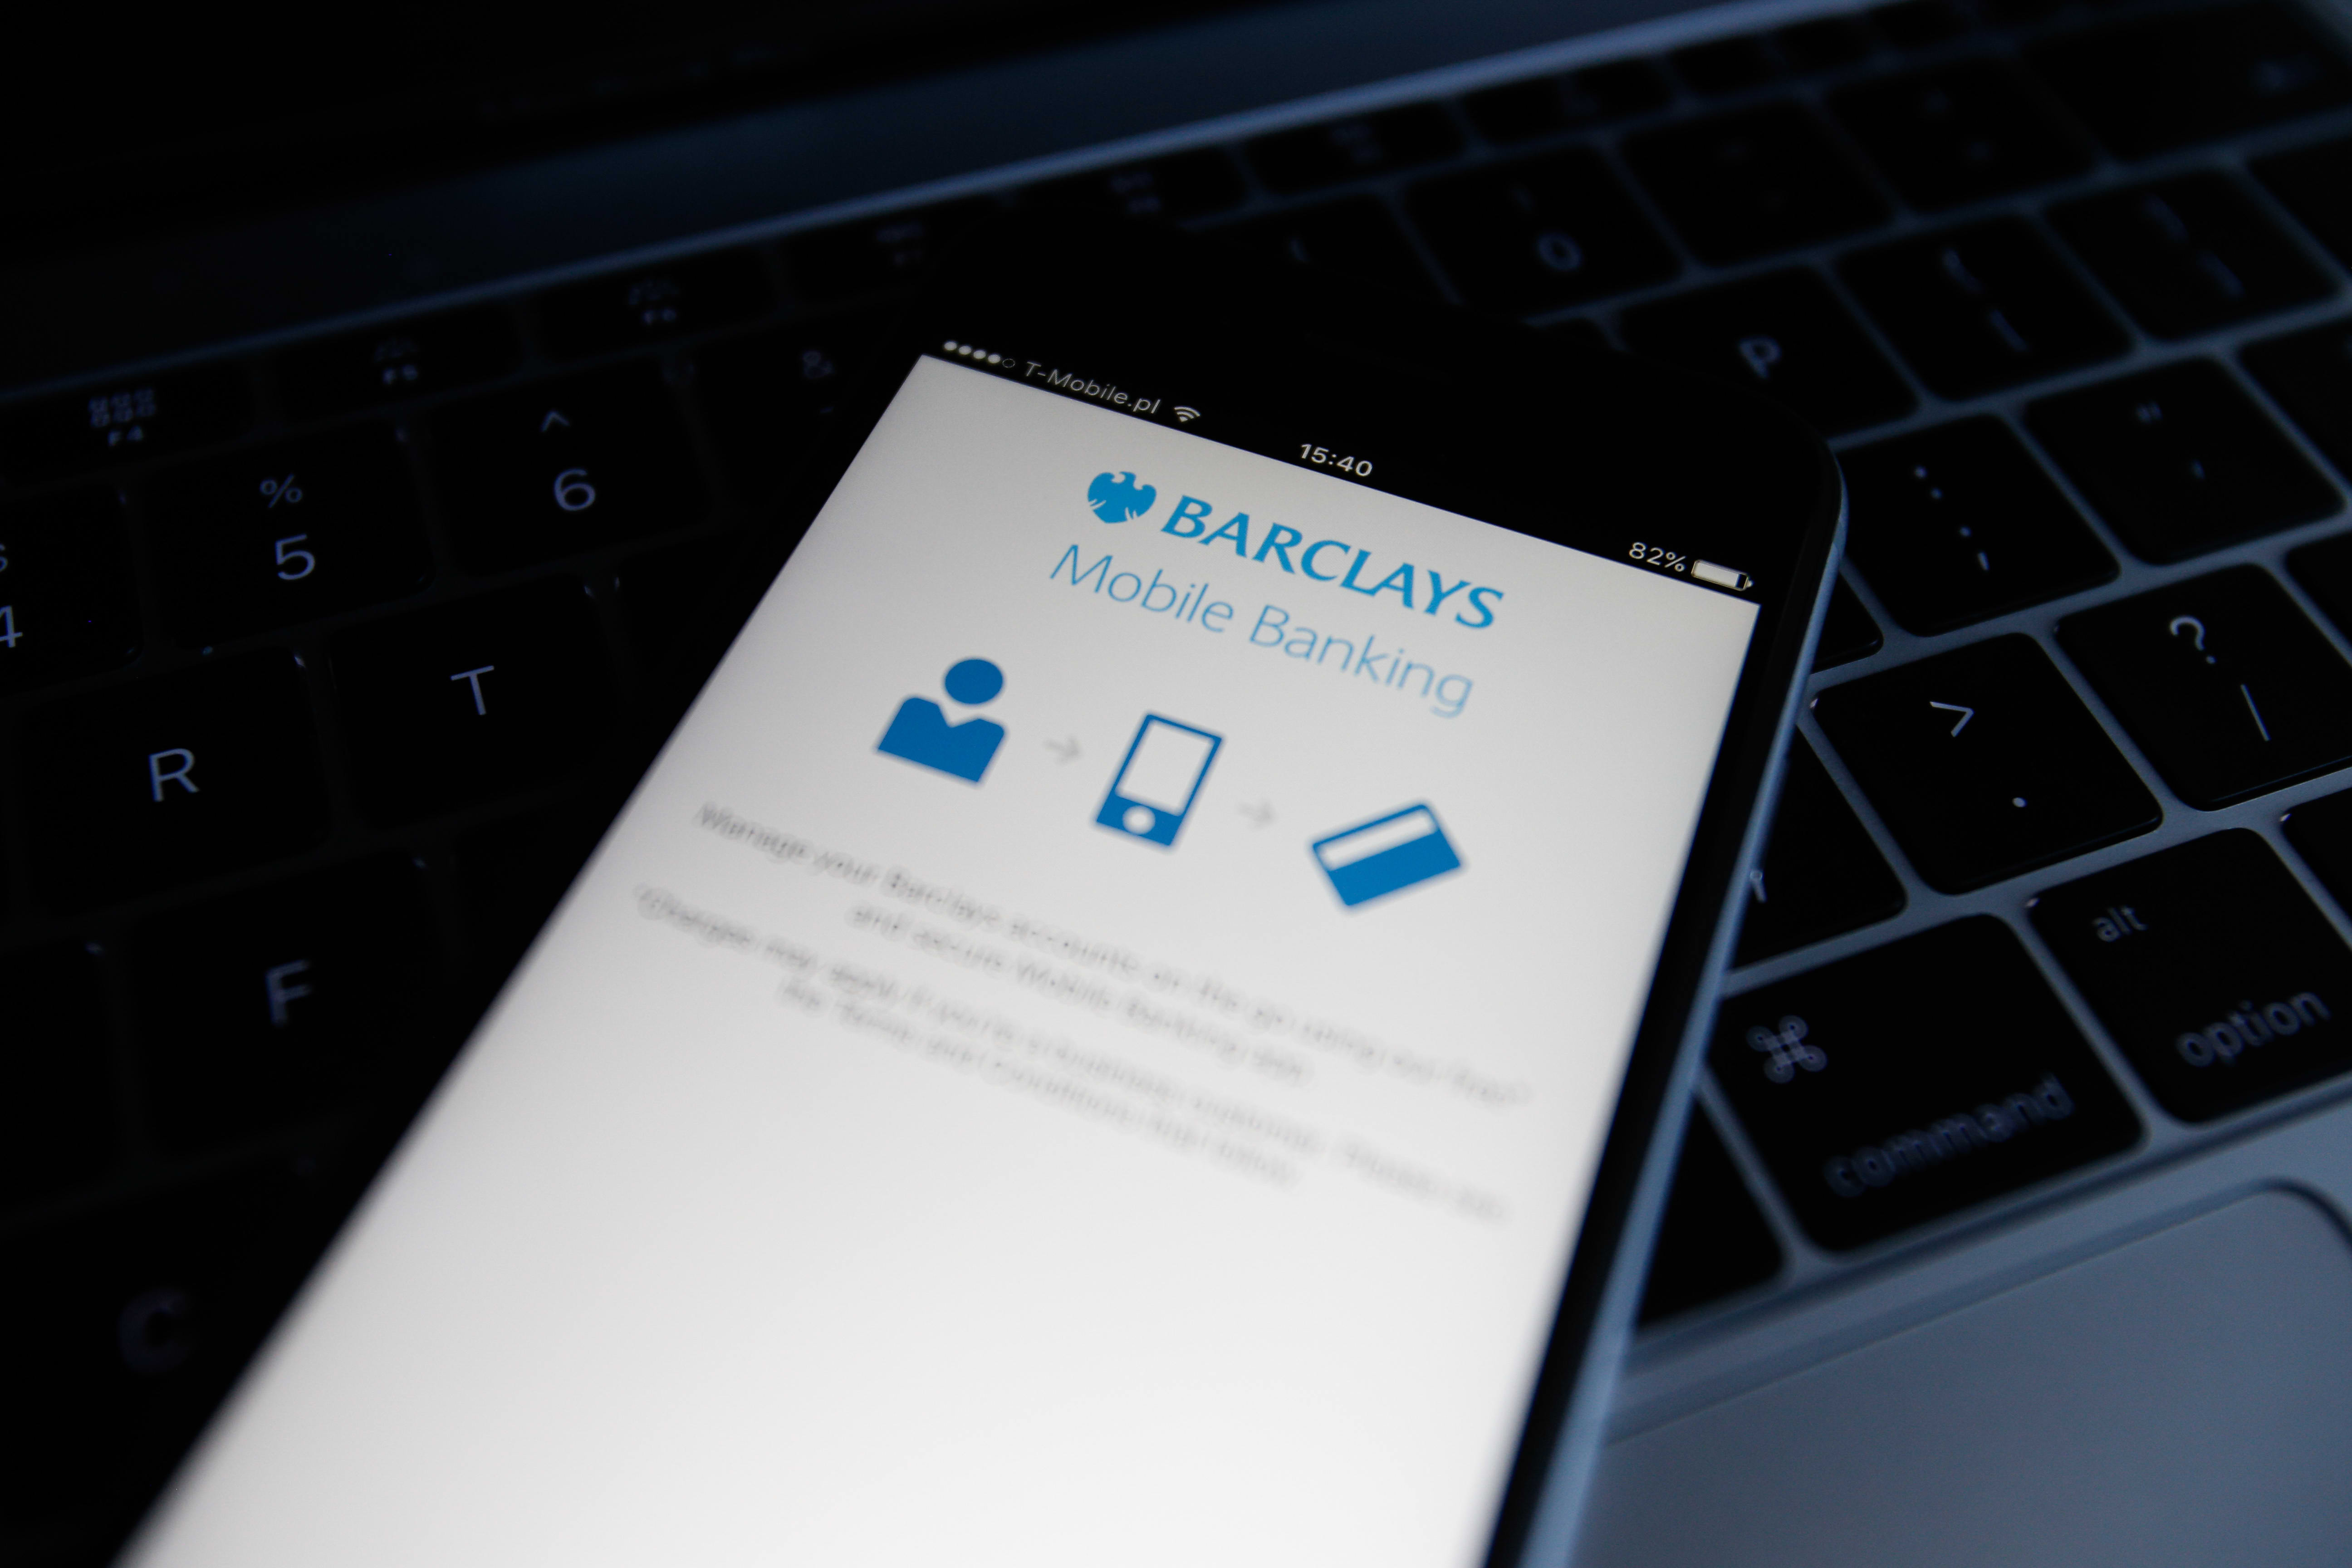 What's the maximum I can transfer online Barclays?